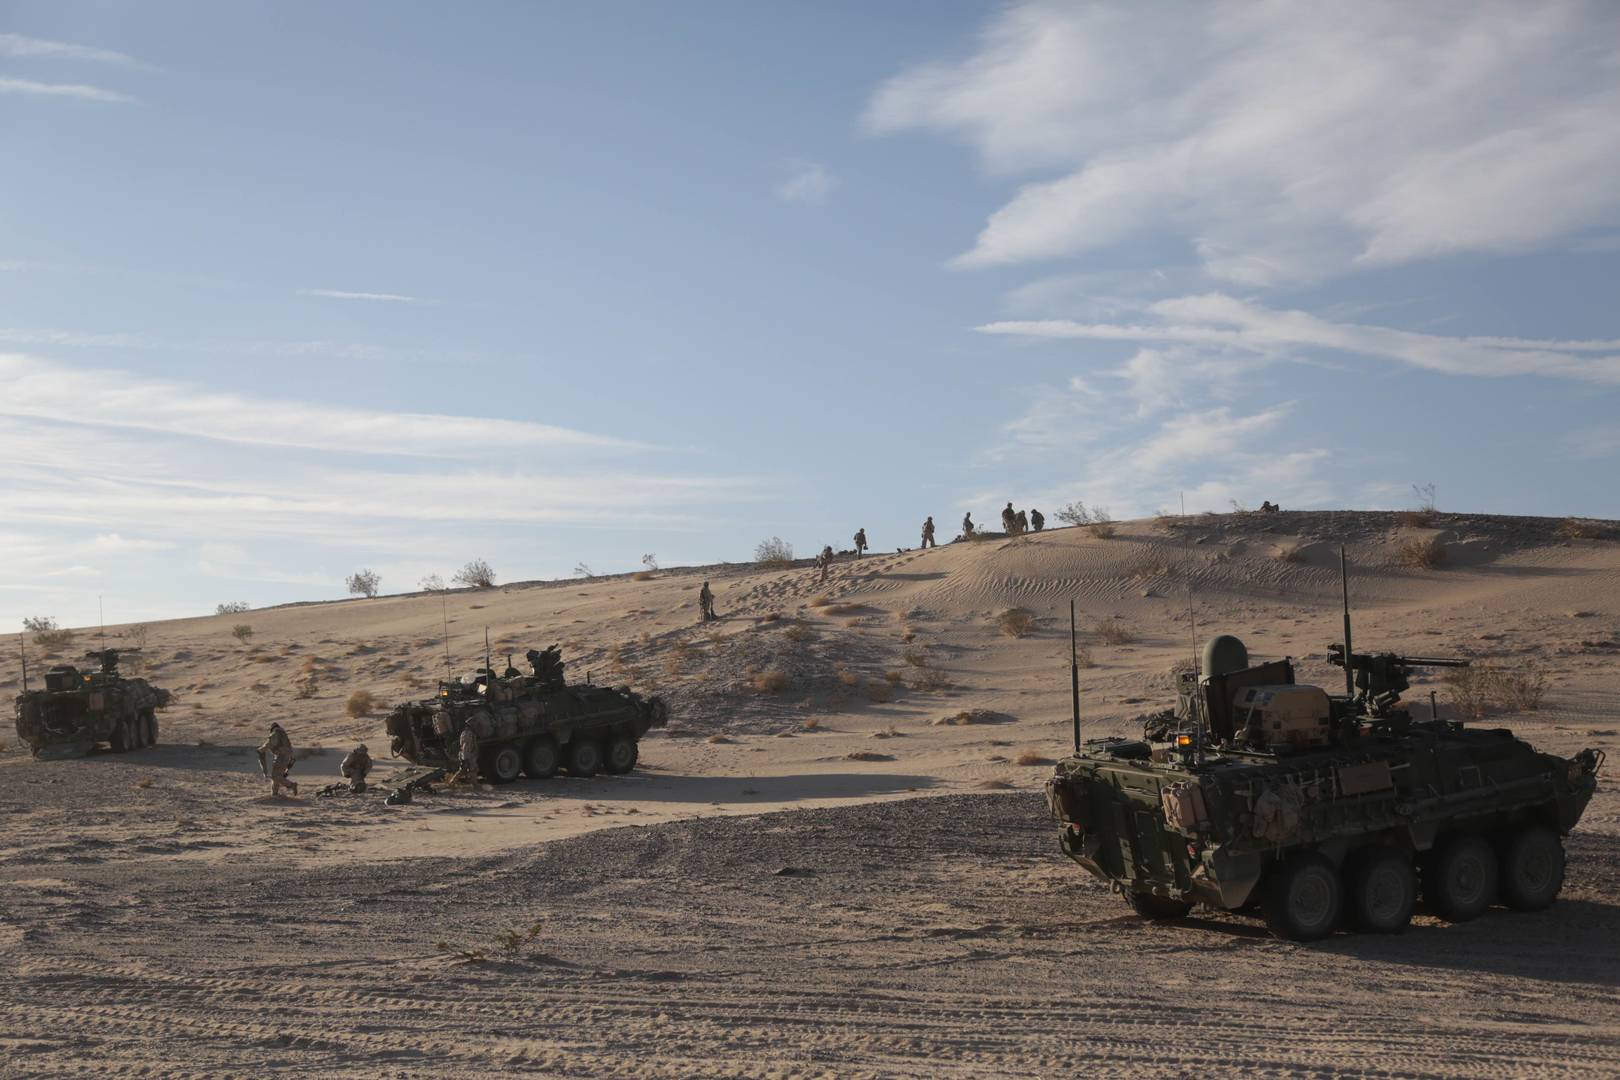 WIN-T Increment 2 Strykers with Soldiers From 1st Armored Division